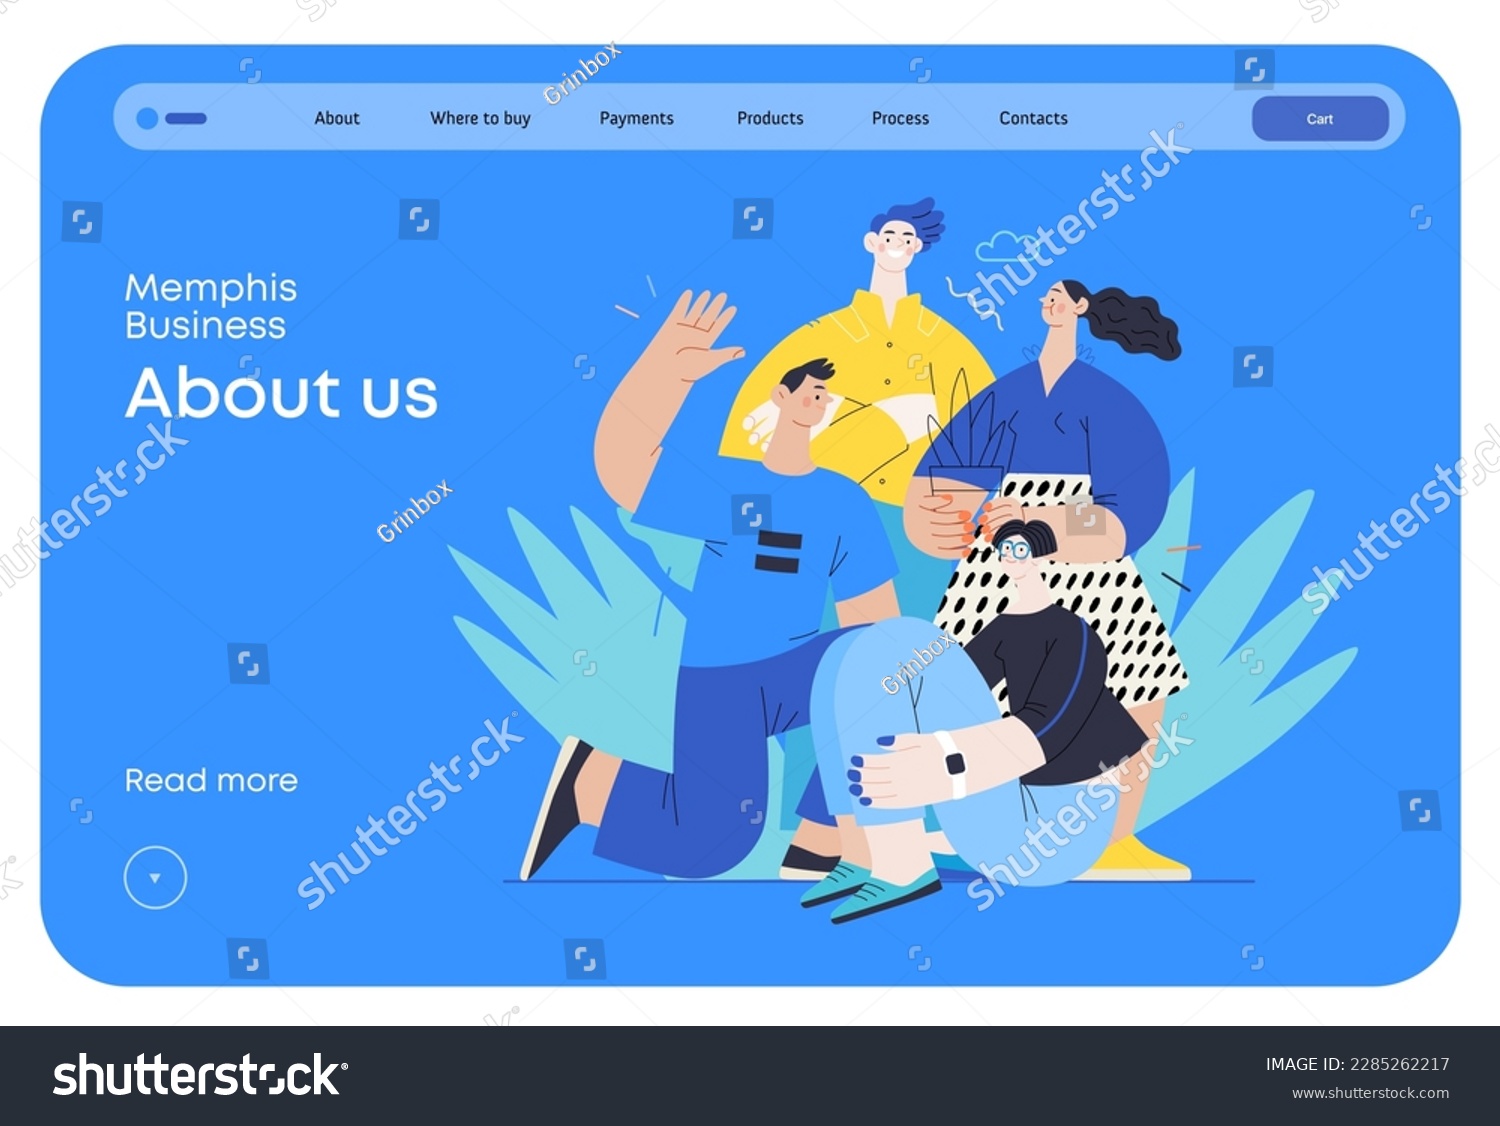 SVG of Memphis business illustration - our team, header. Flat style modern outlined vector concept illustration. Group of people, creaw, standing together. Corporate teamwork business metaphor. svg